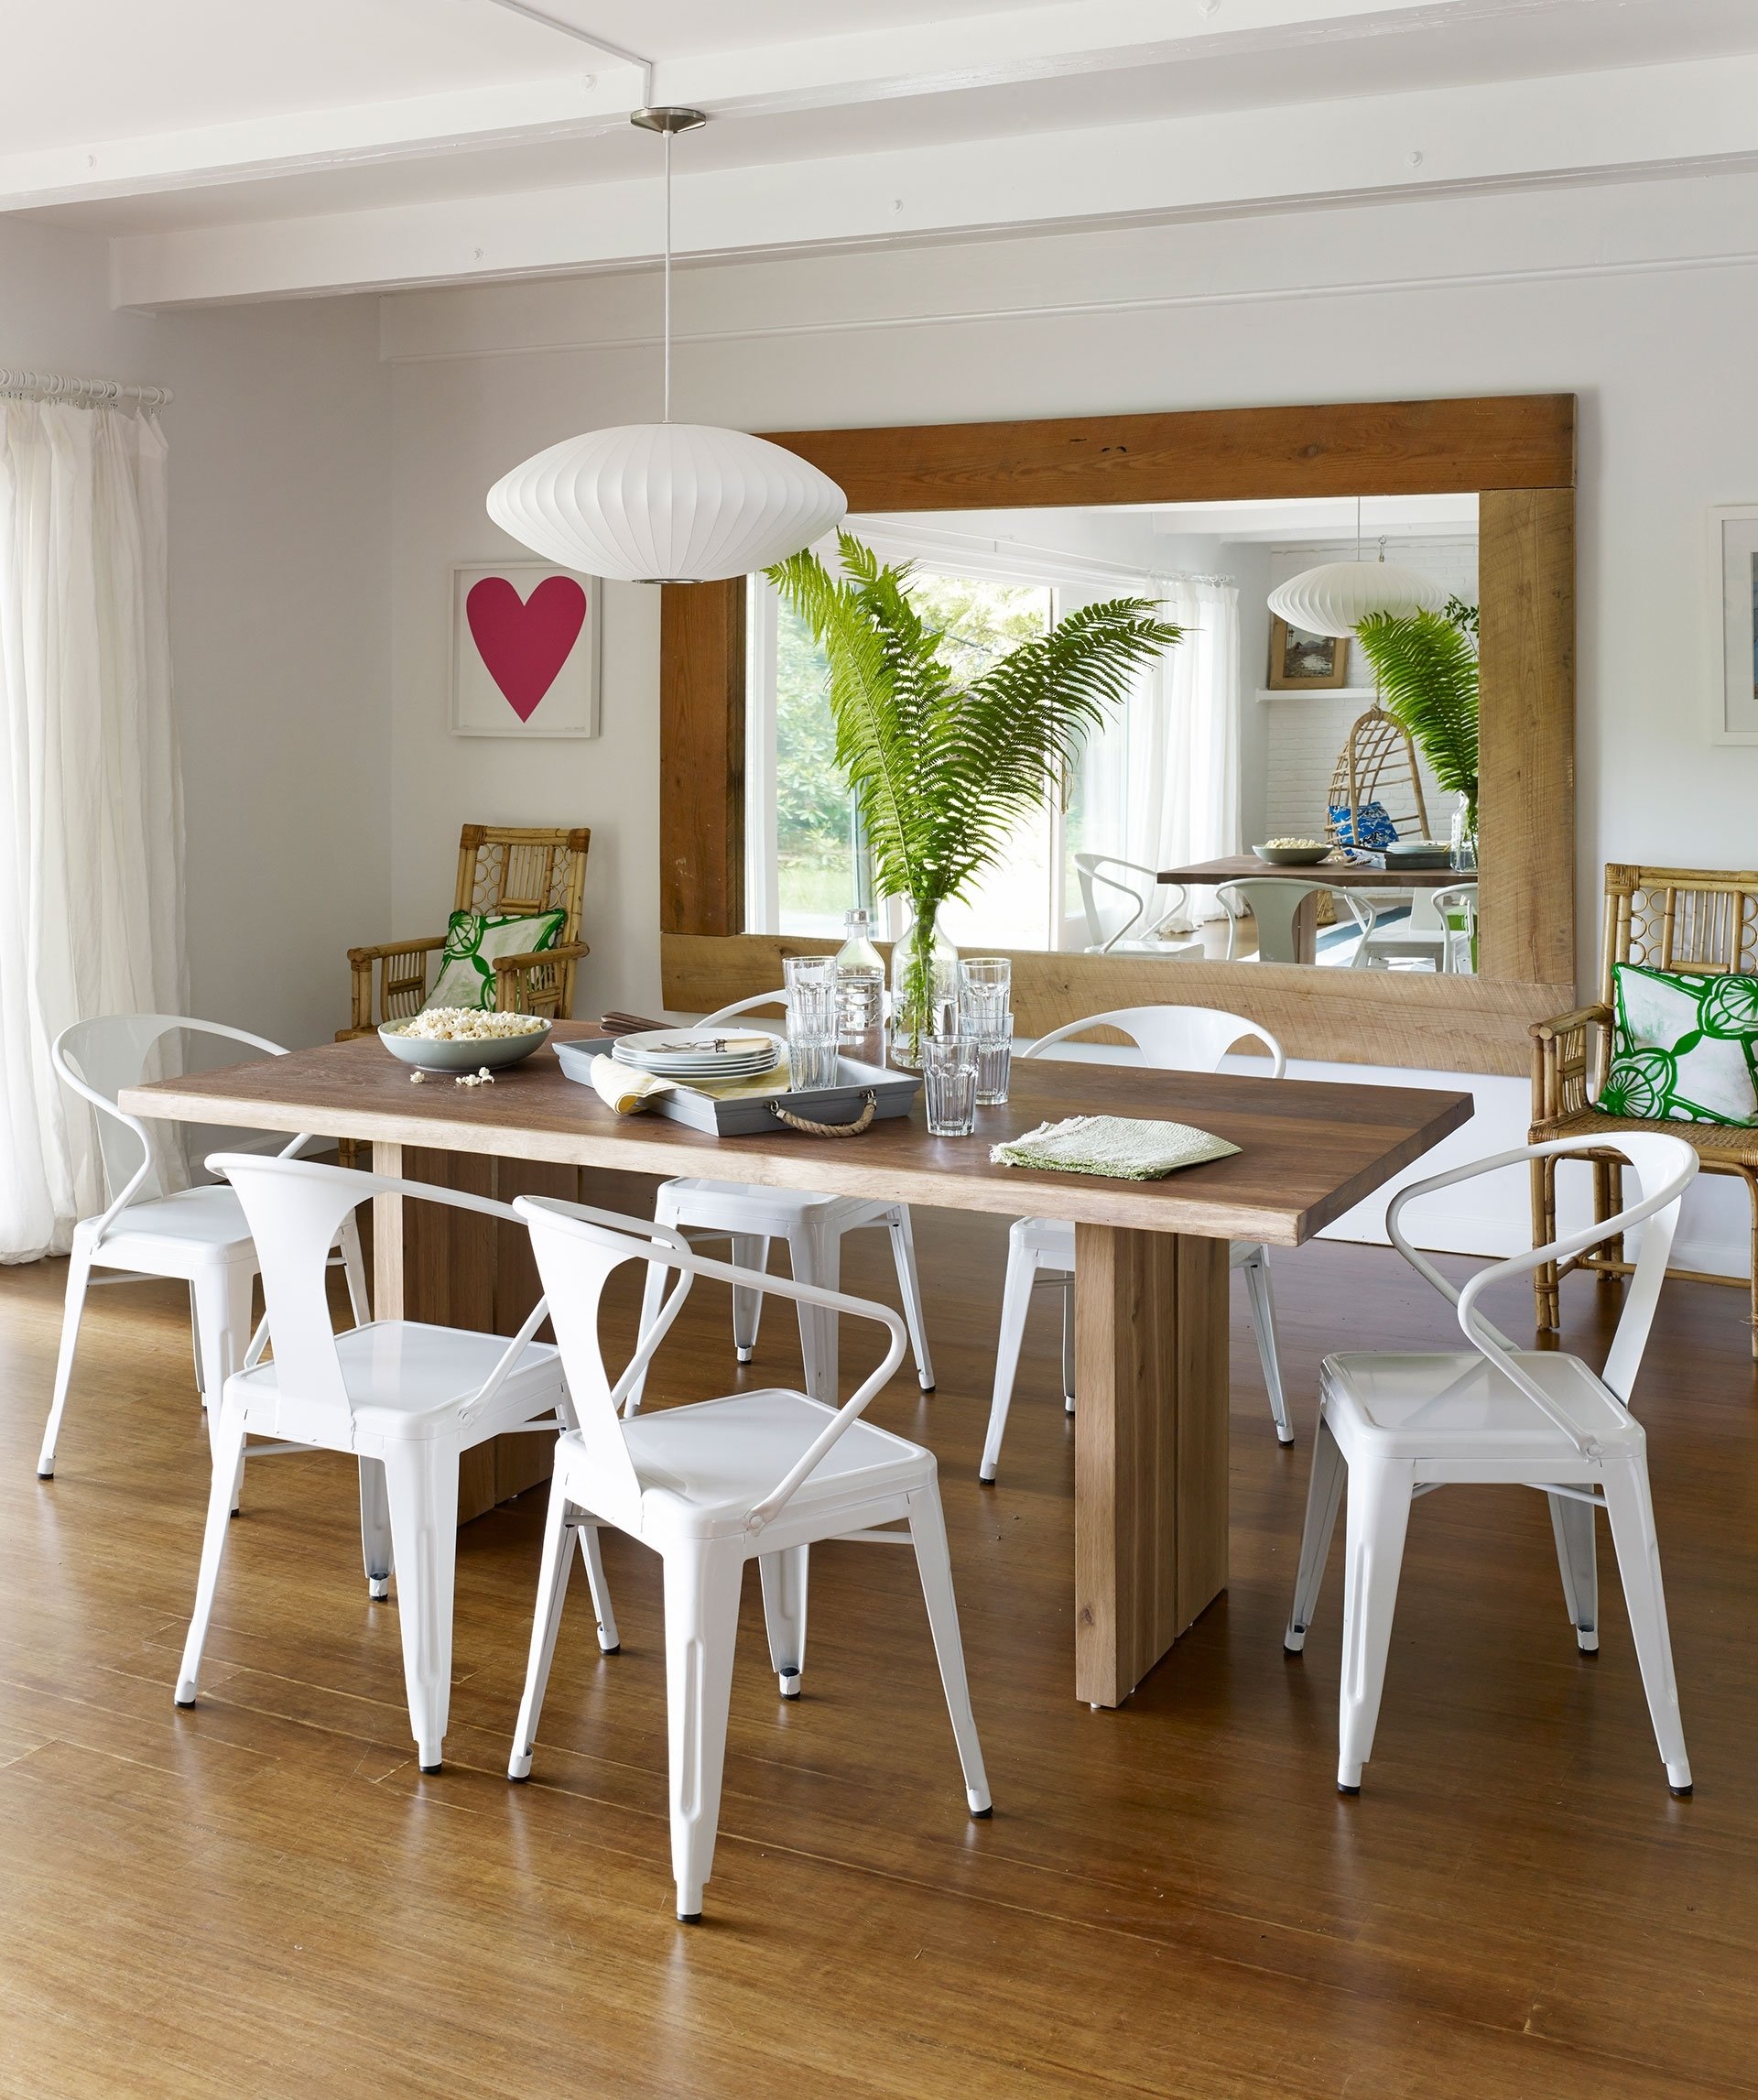 10 Lovable Decorating Ideas For Dining Rooms country dining room ideas modern wall decor shabby chic farmhouse 2022